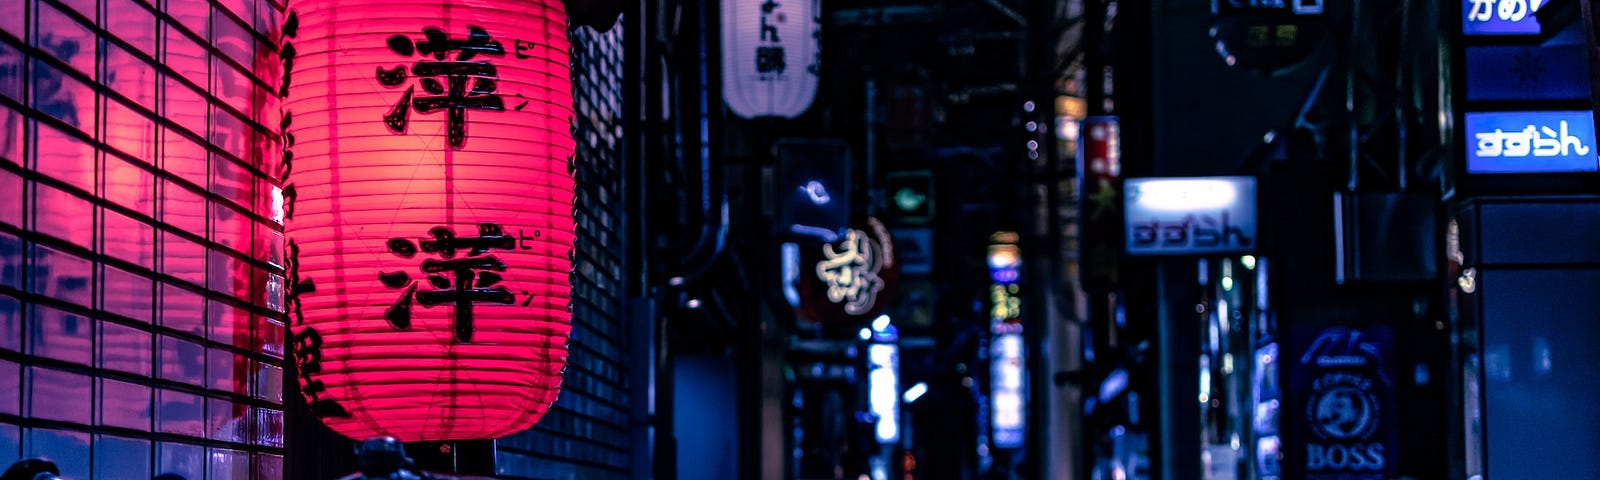 An active street or mall in Japan with a red lantern indicating a bar or restaurant.